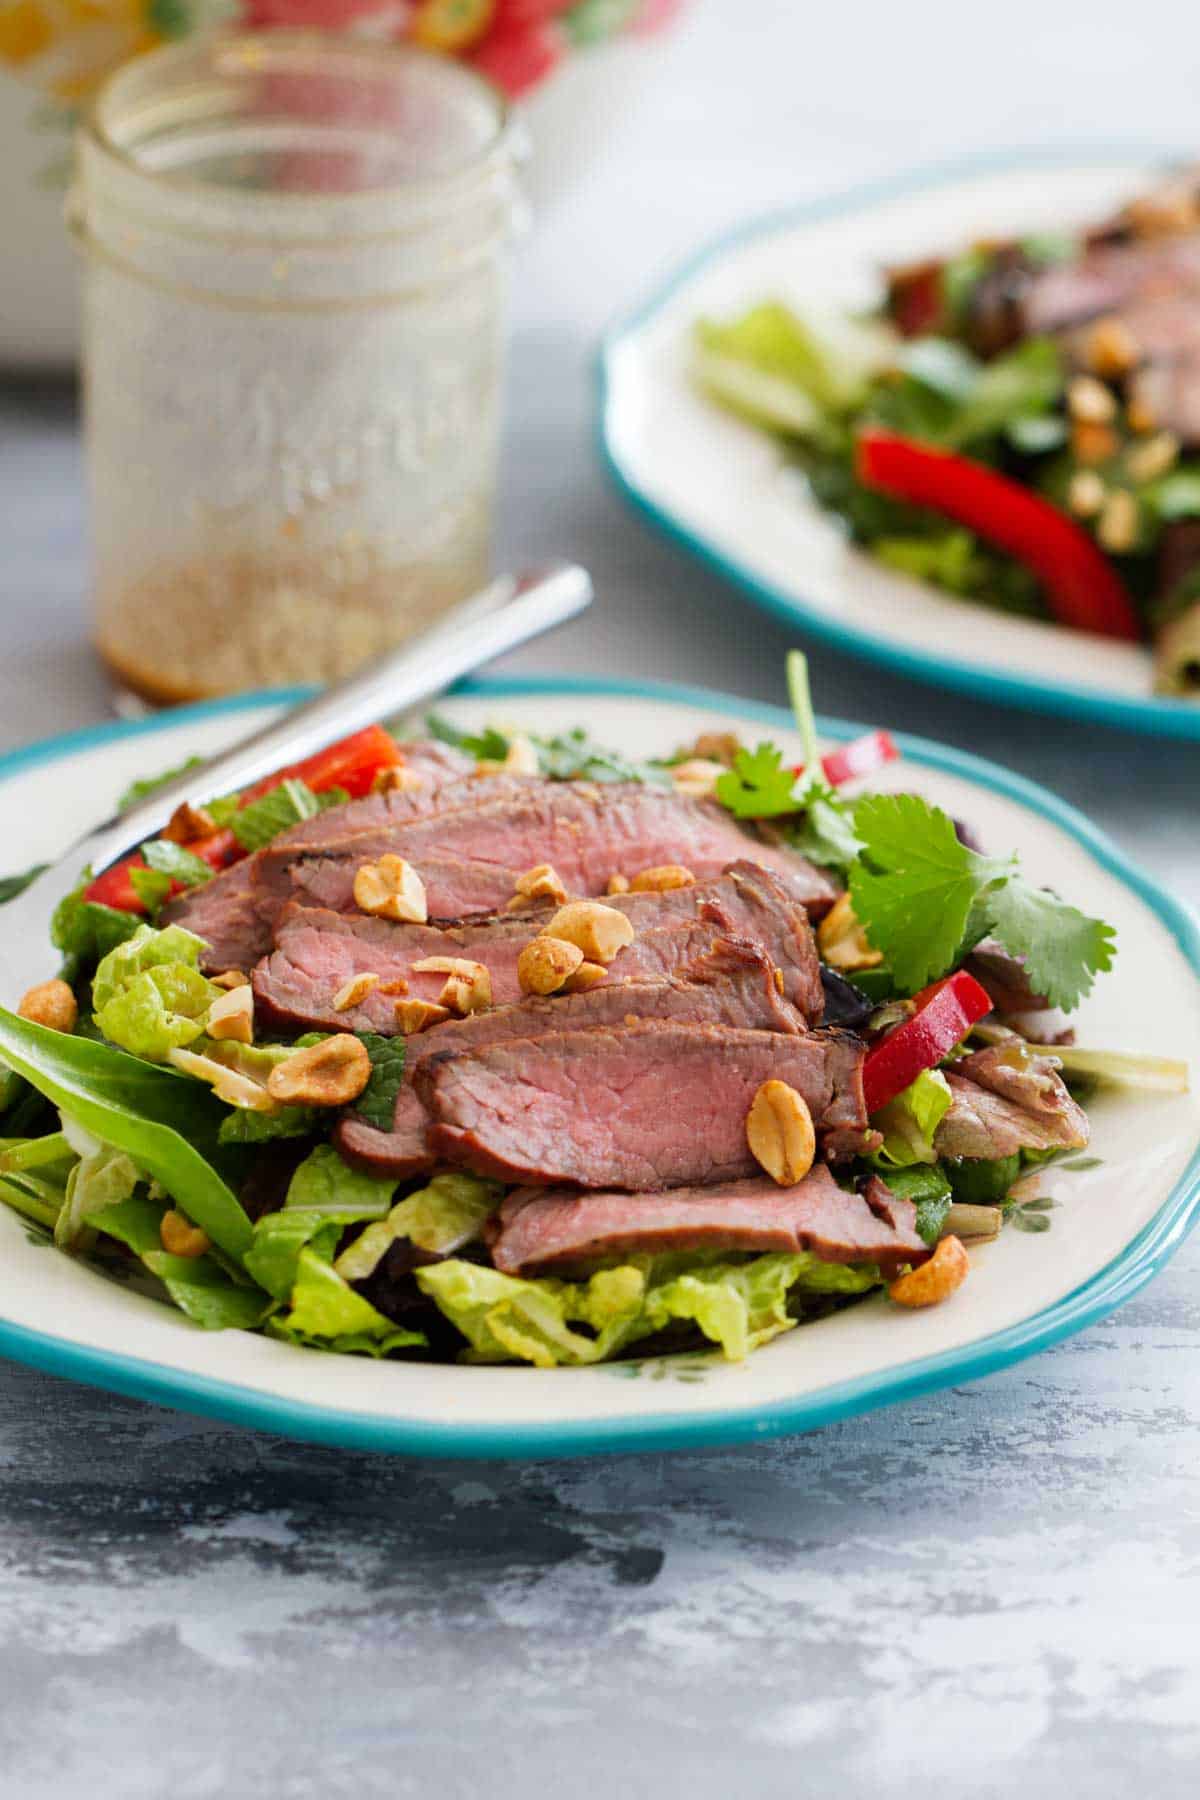 Plate with Thai Steak Salad topped with peanuts